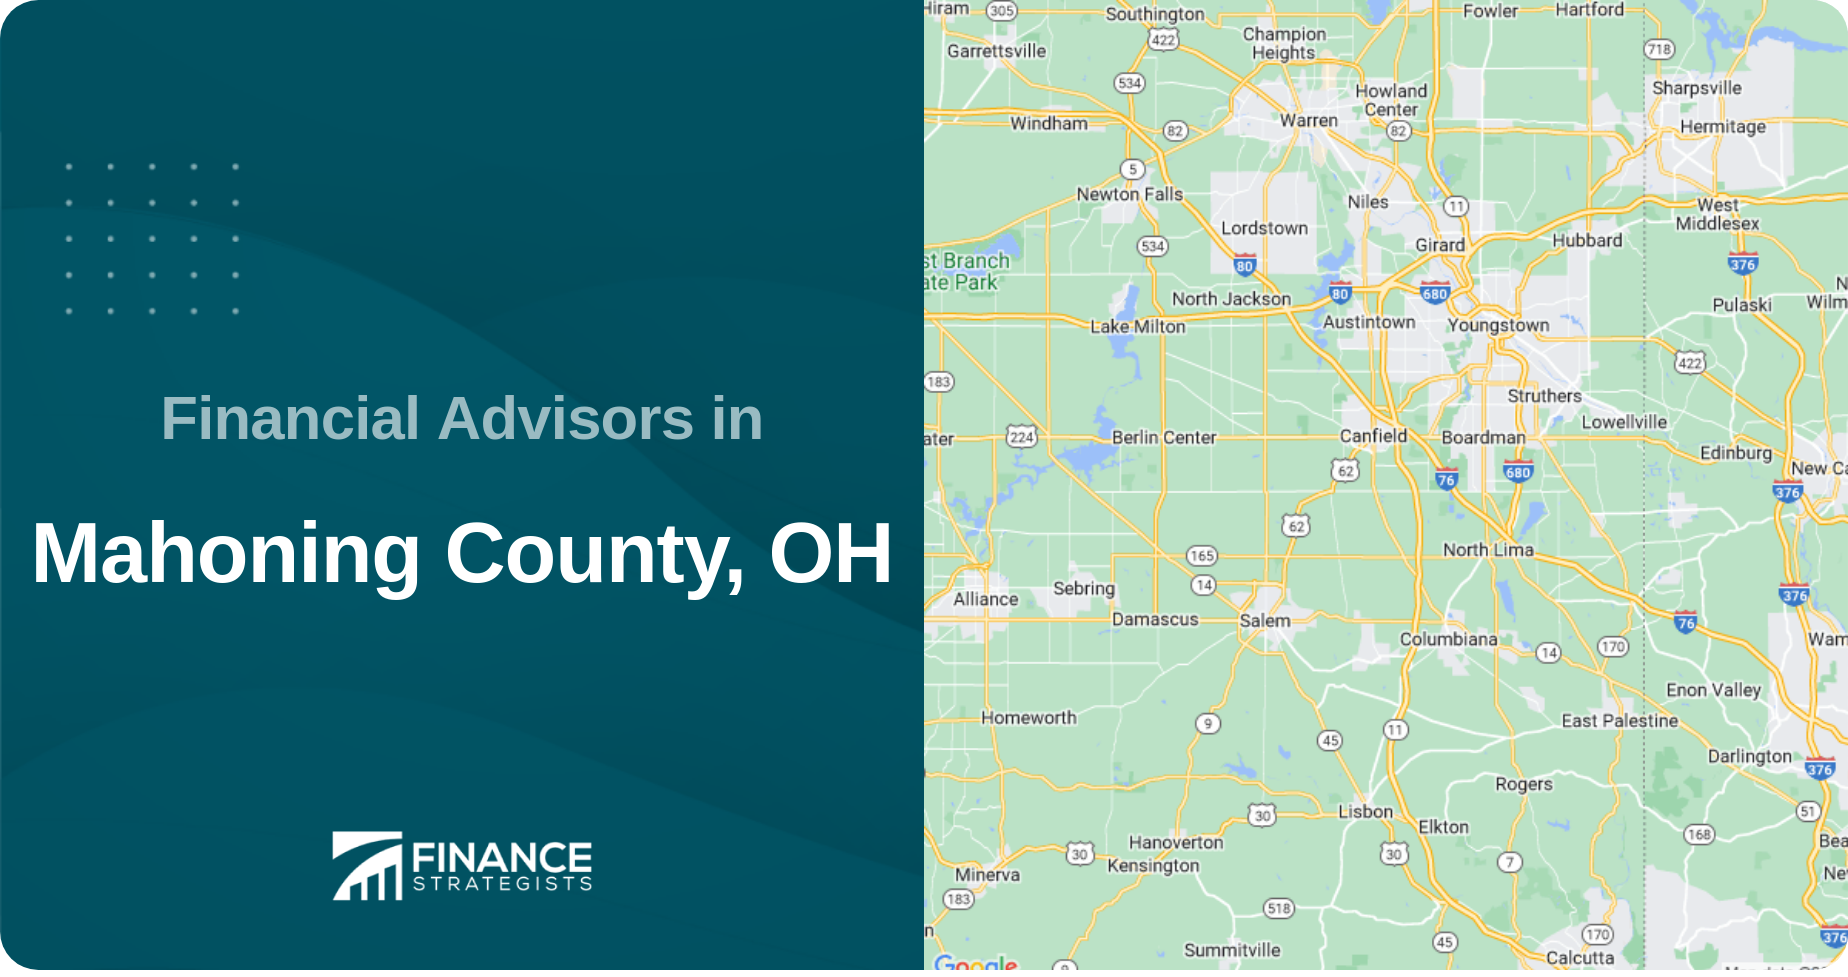 Financial Advisors in Mahoning County, OH